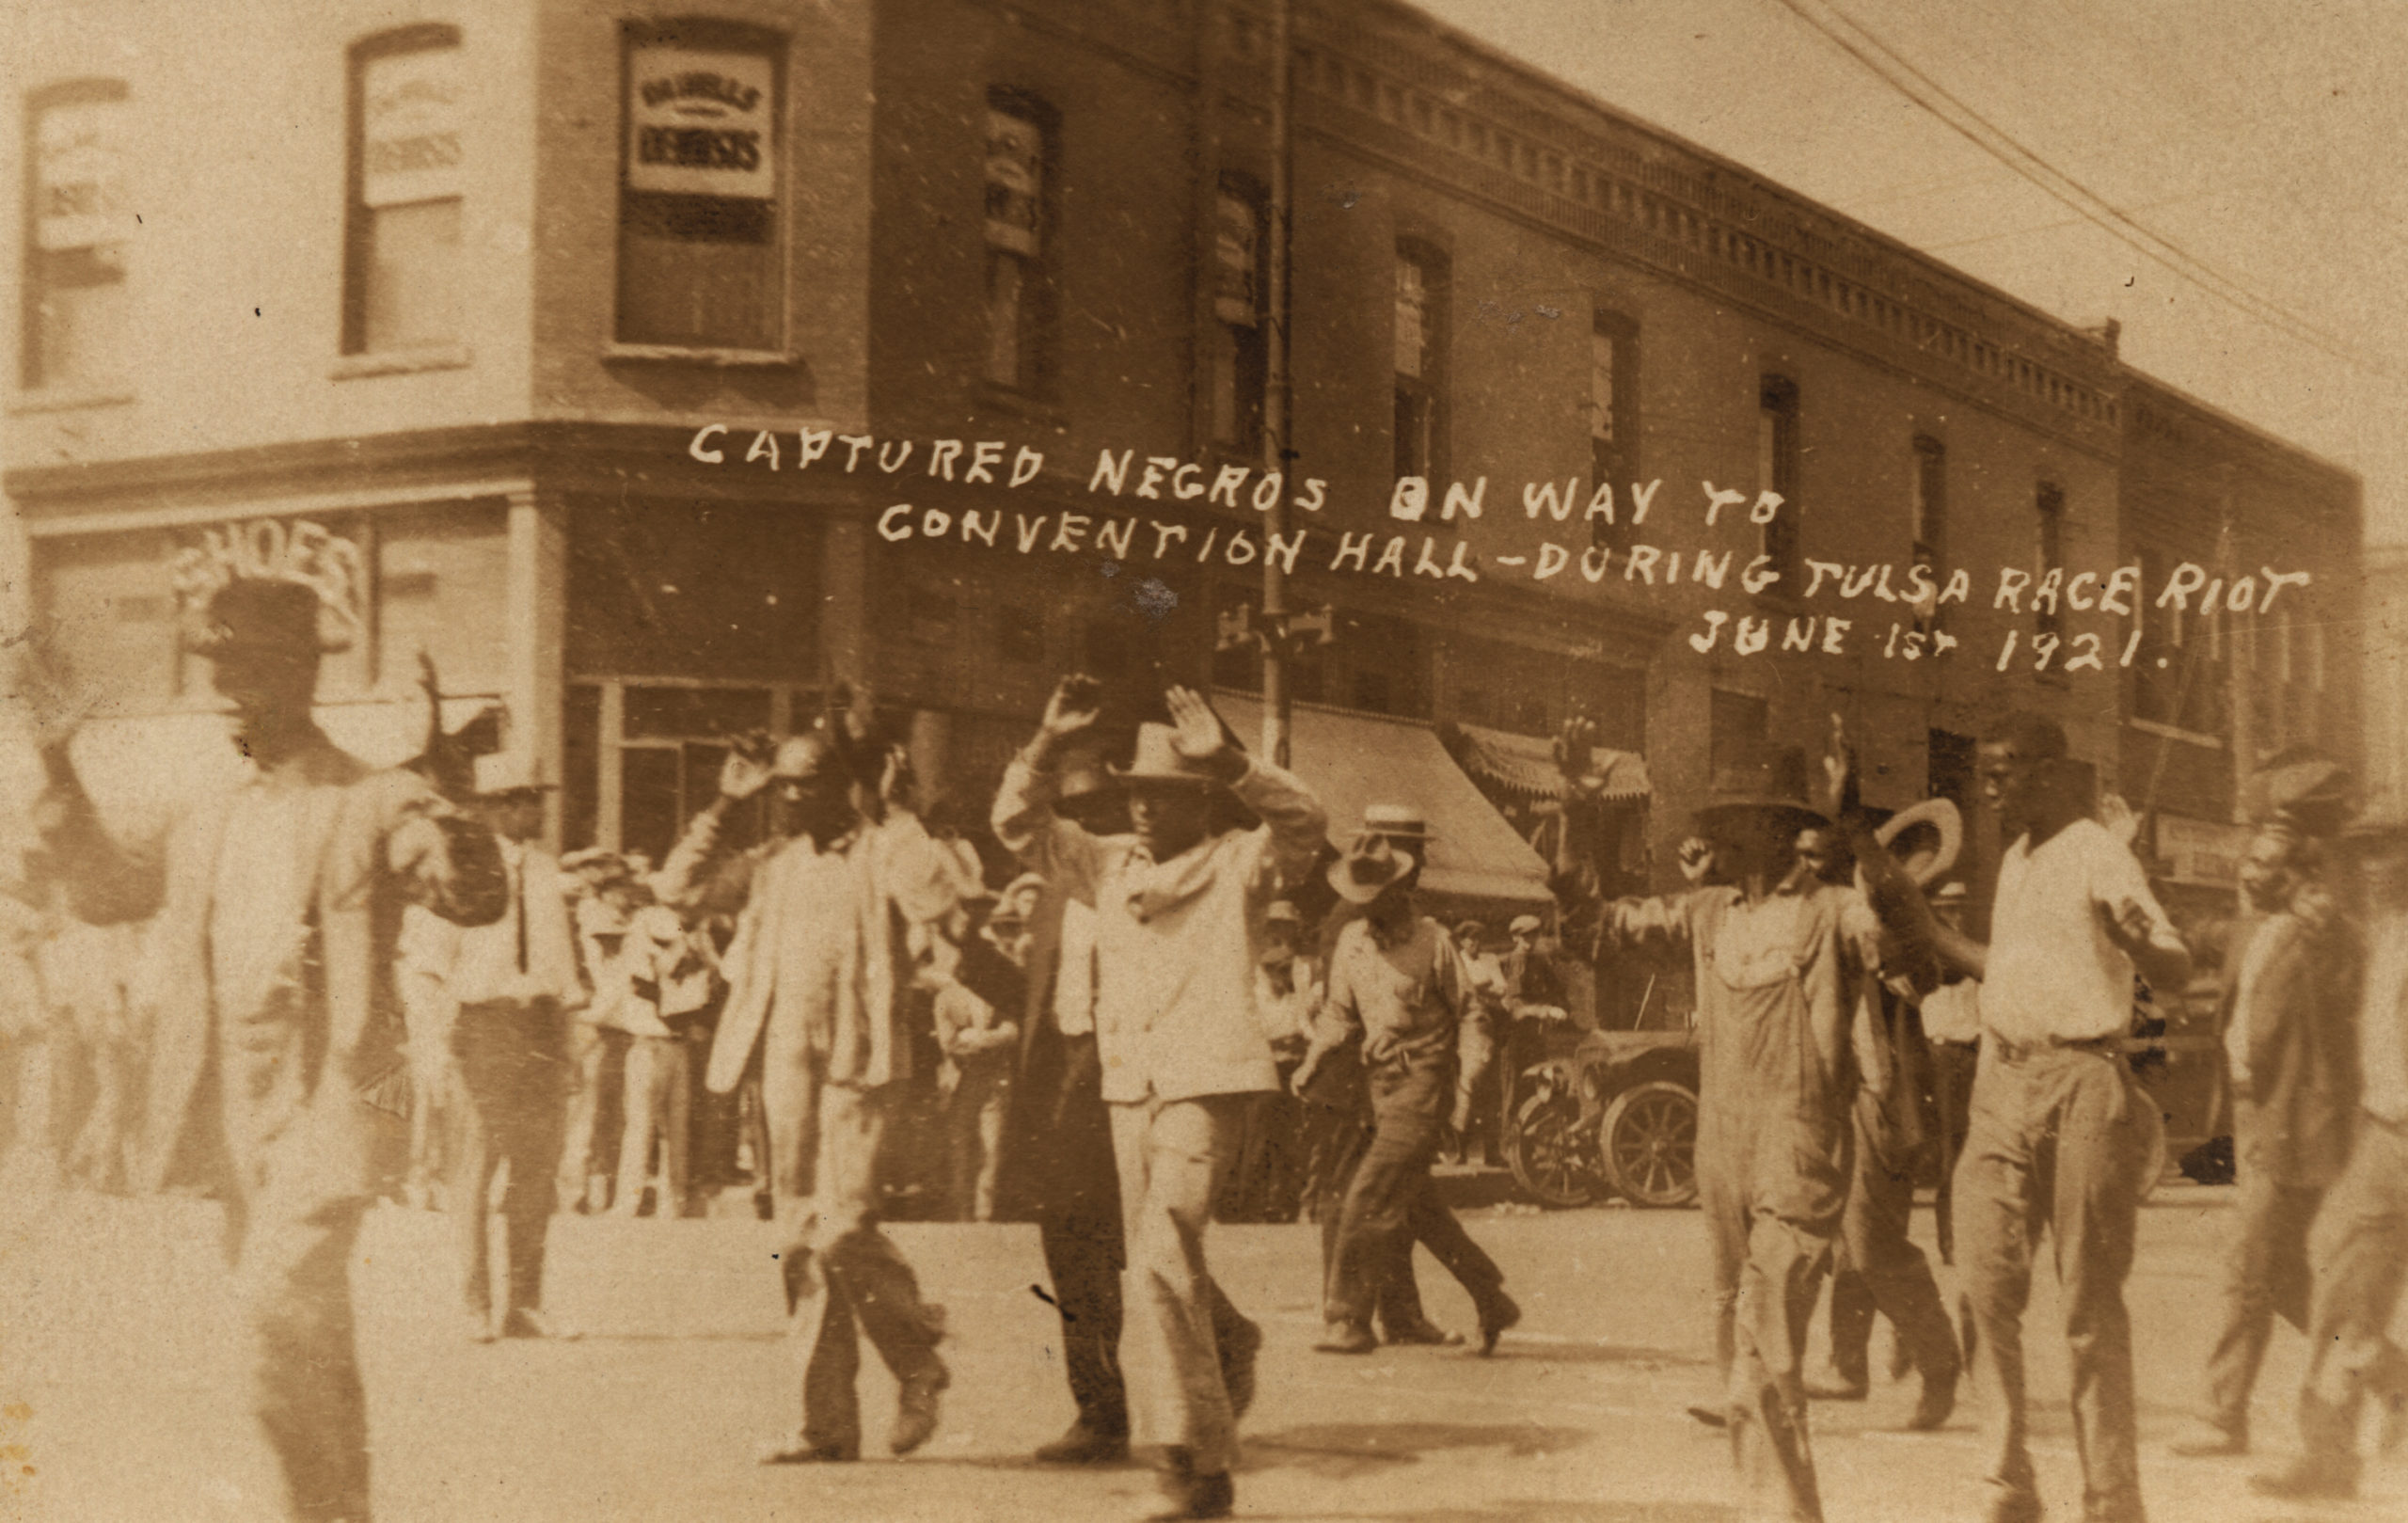 A postcard showing a group of detainees being marched past the corner of 2nd and Main under armed guard. The building in the background is 202 S. Main, on the southwest corner. Based on the shadows of the building and the people, it is late morning. They are heading east (or are turning to head east) on 2nd, so it is more likely that they are among those being marched south towards McNulty Park than to be heading towards the Convention Hall, which is several blocks north of this intersection.